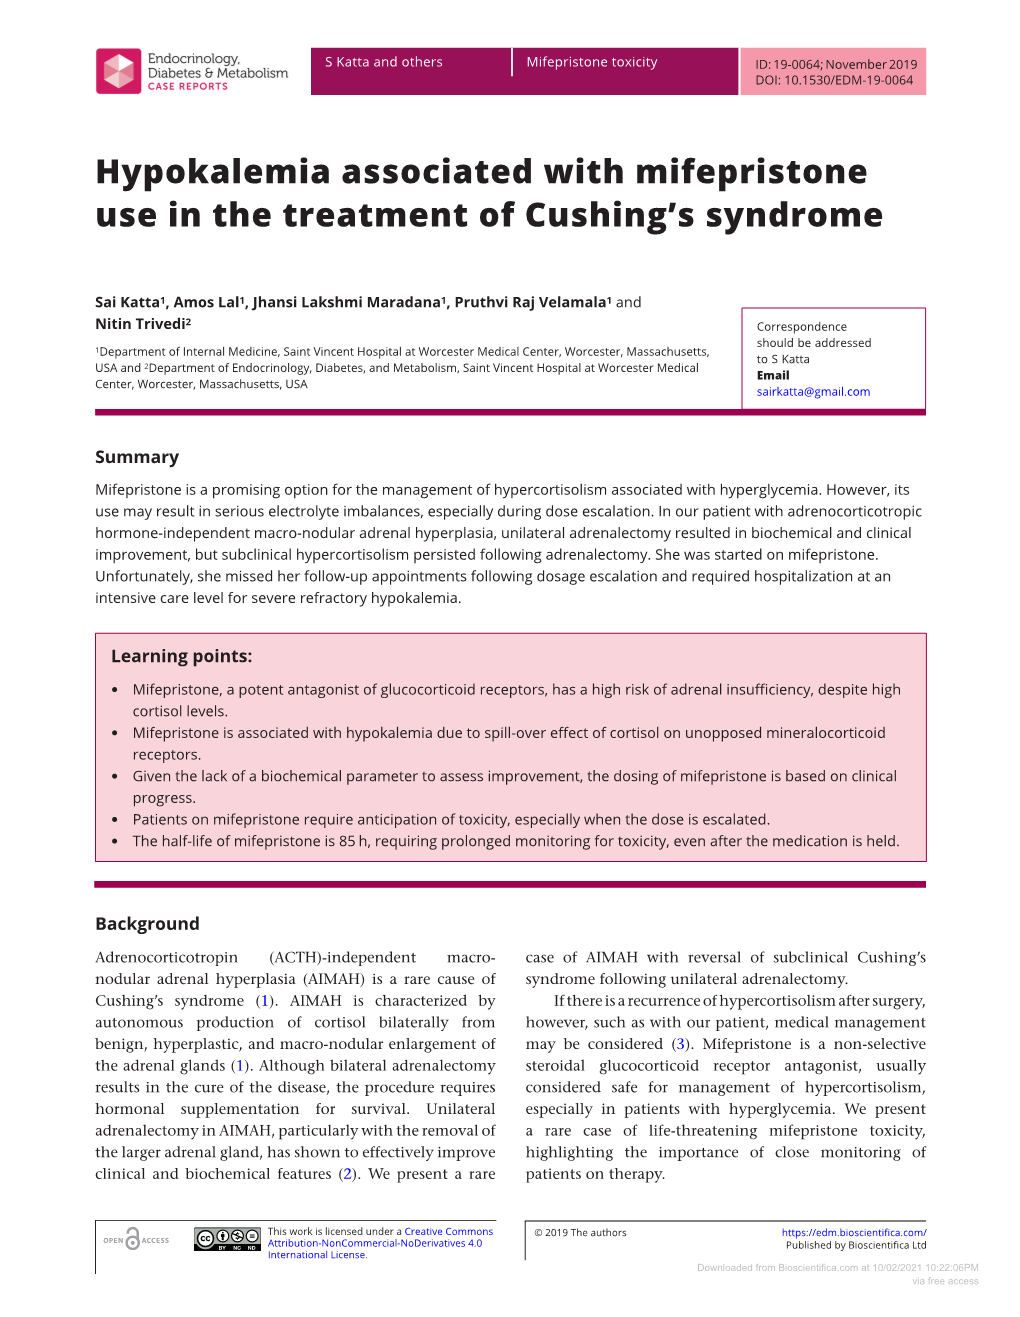 Hypokalemia Associated with Mifepristone Use in the Treatment of Cushing’S Syndrome